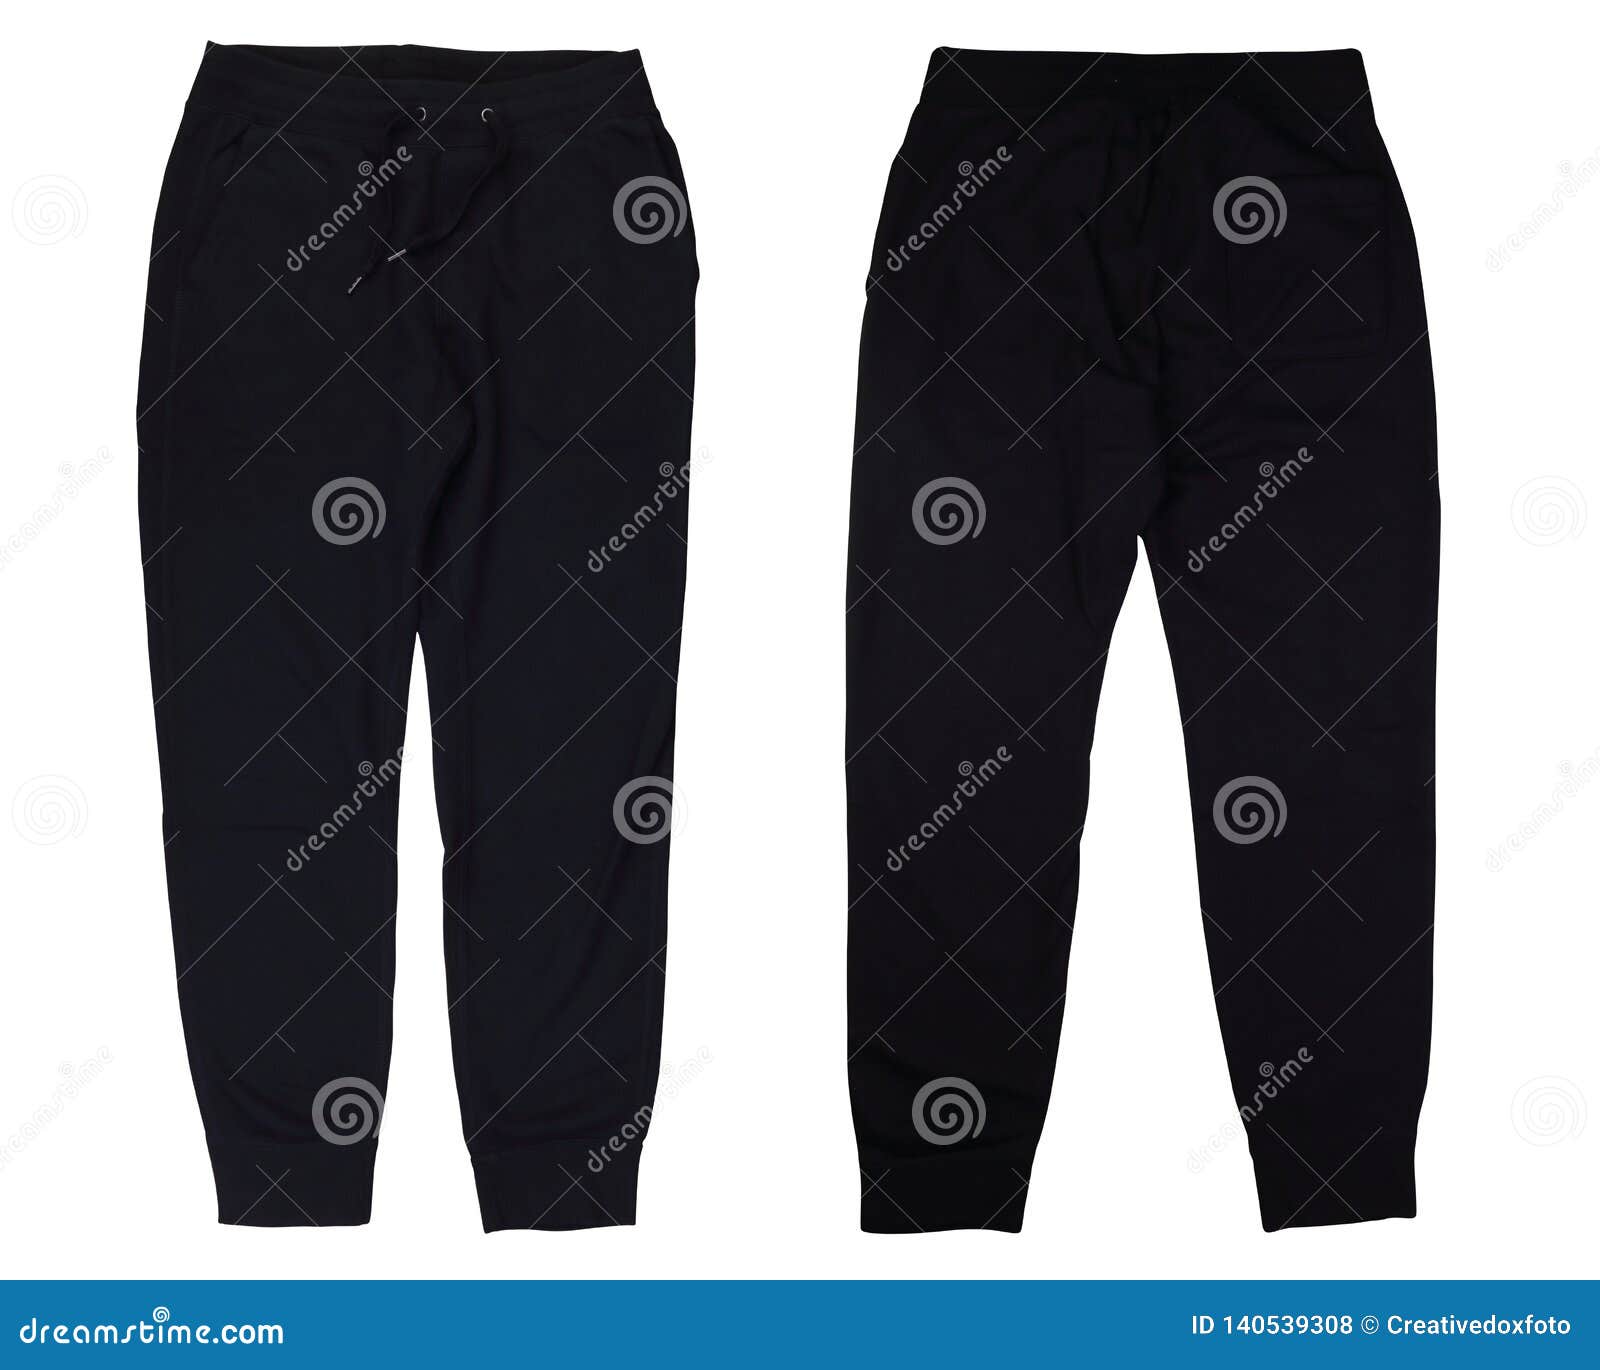 3,204 Sweatpants Photos - Free & Royalty-Free Stock Photos from Dreamstime